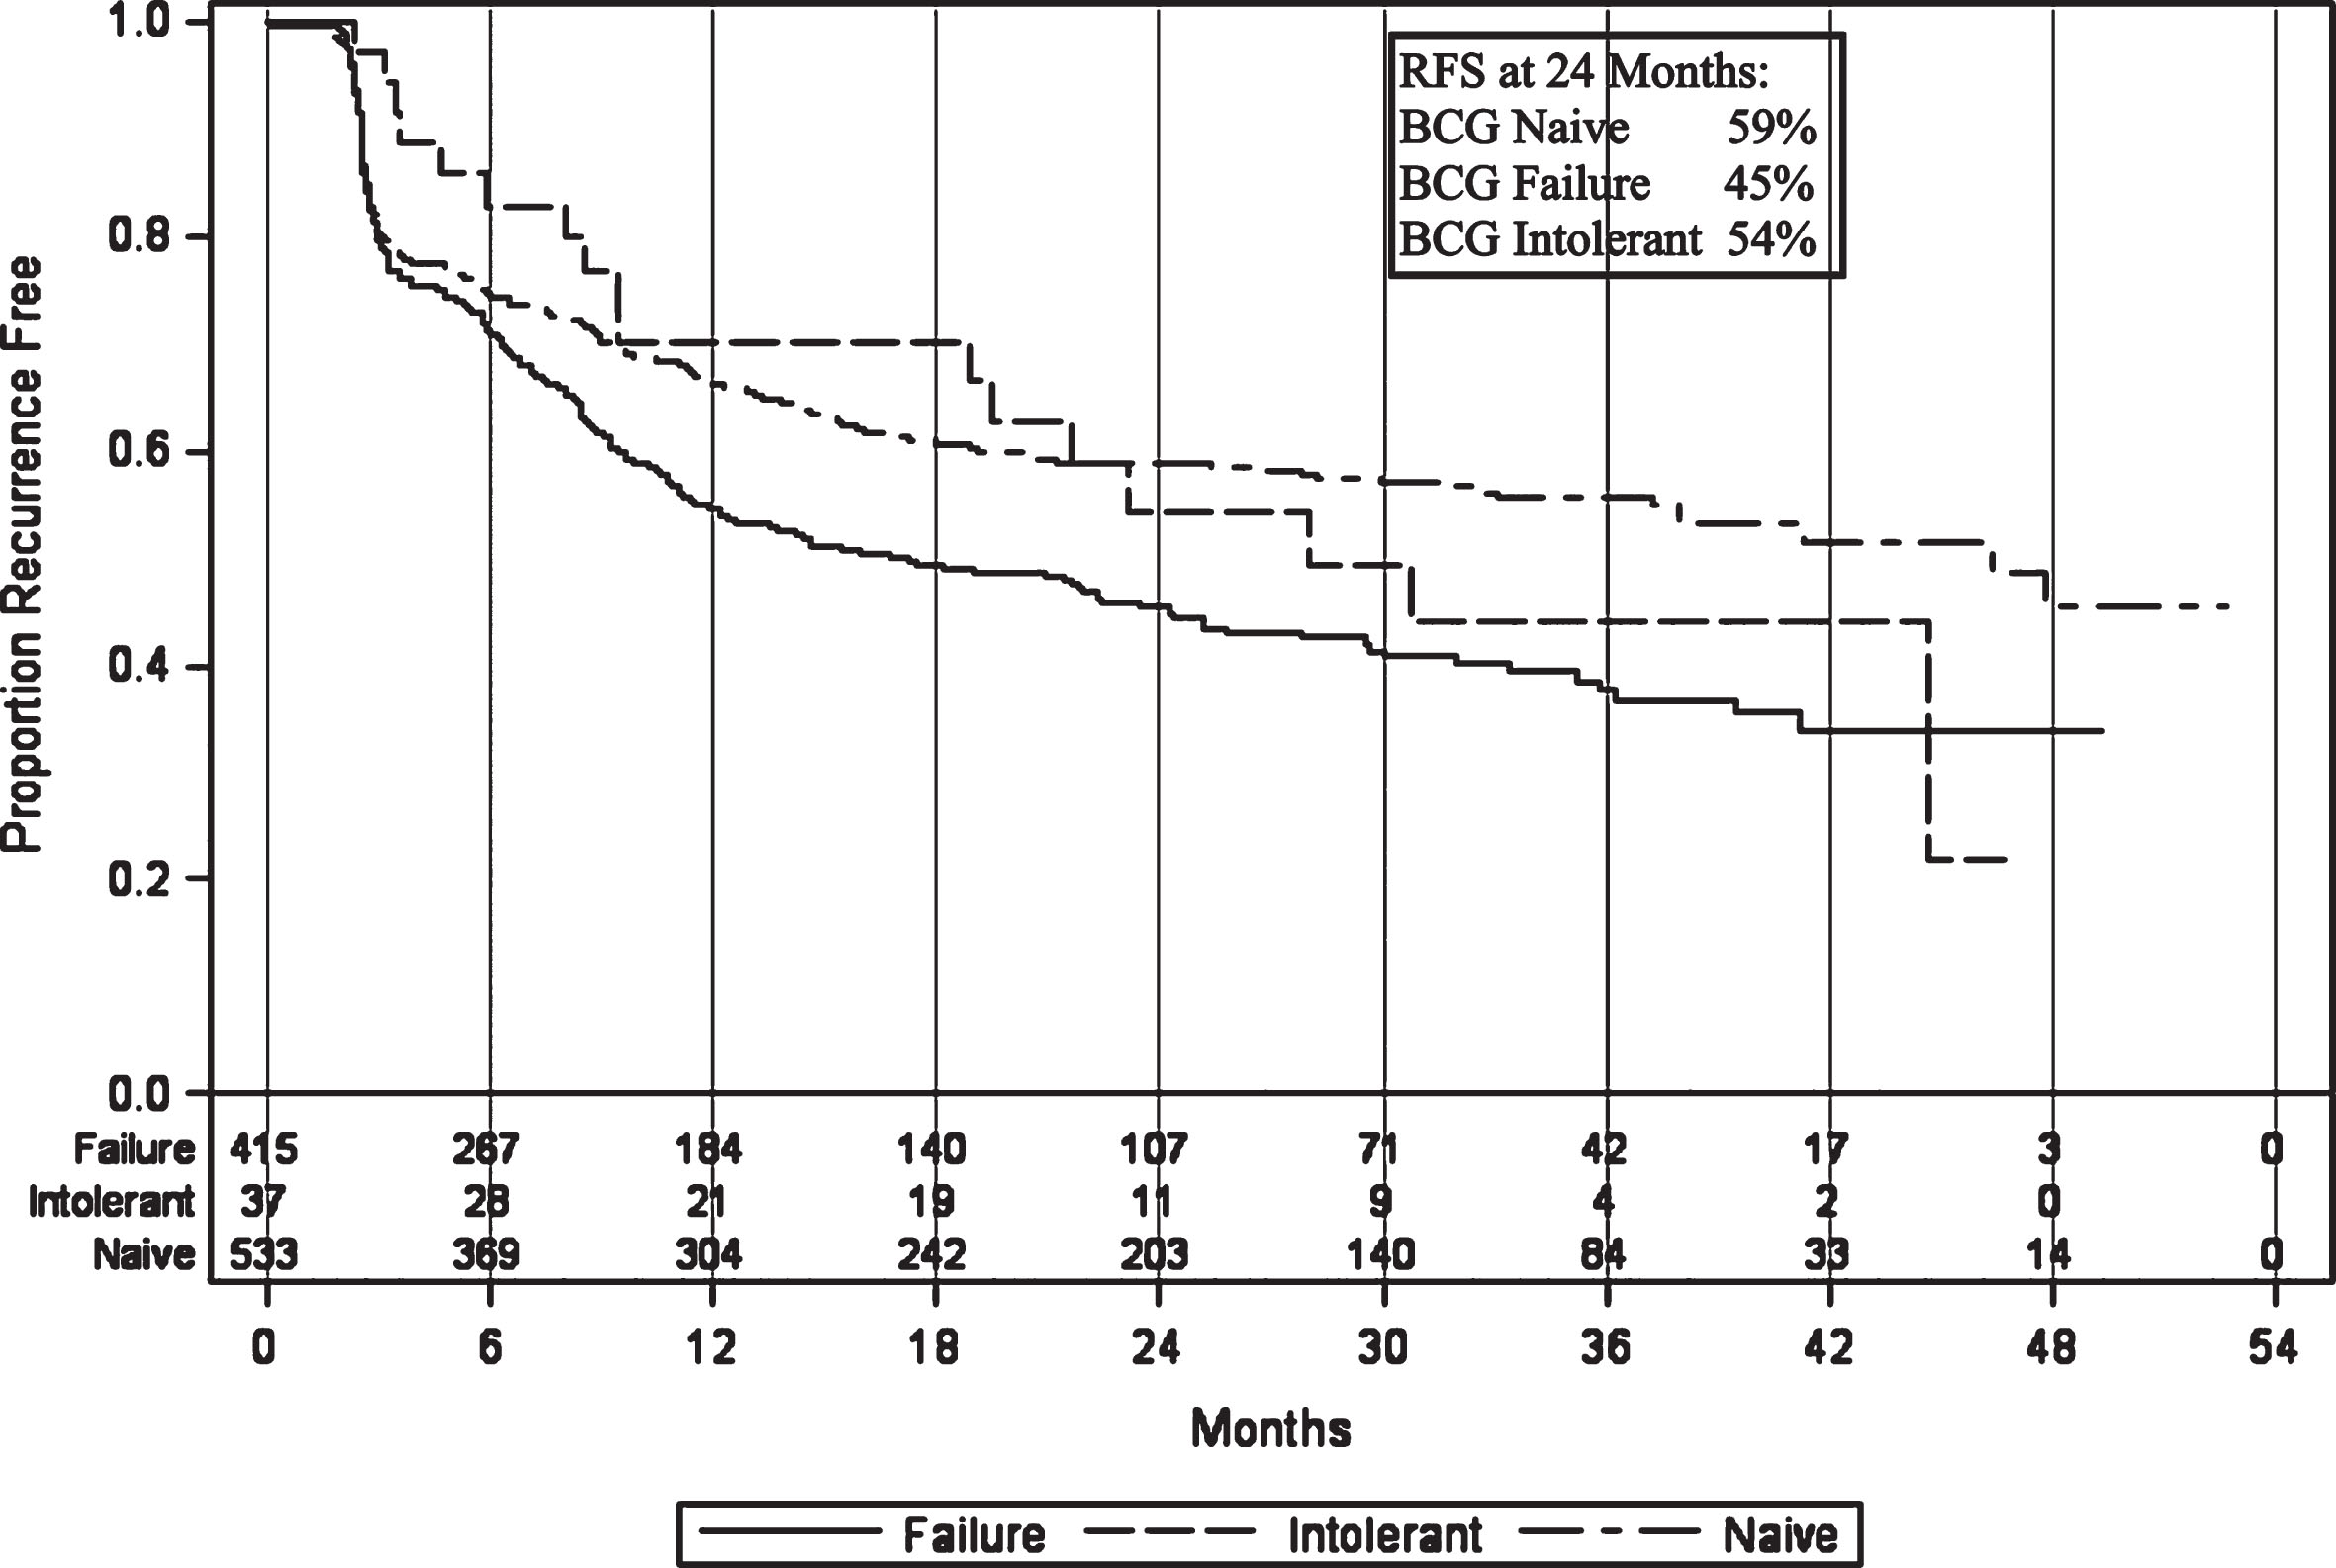 Recurrence-free survival in patients treated with BCG plus Interferon therapy.